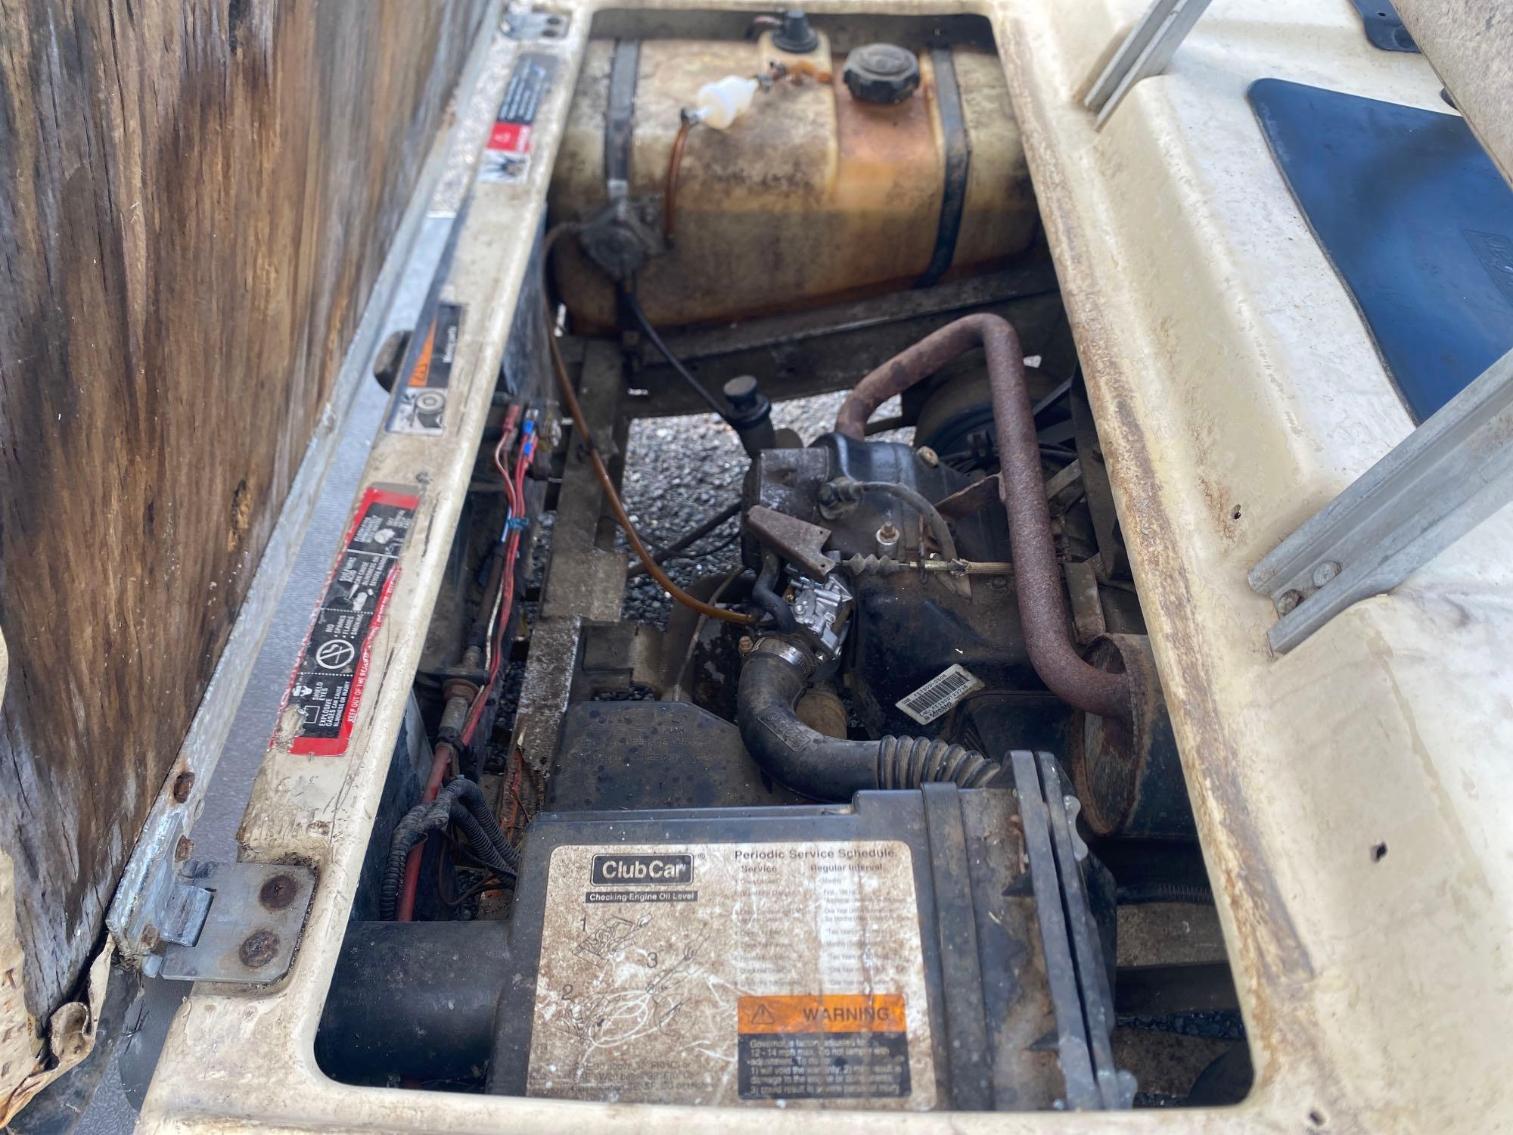 Image for Club Car Golf Cart, Per seller- new battery, new carb, new fuel filter